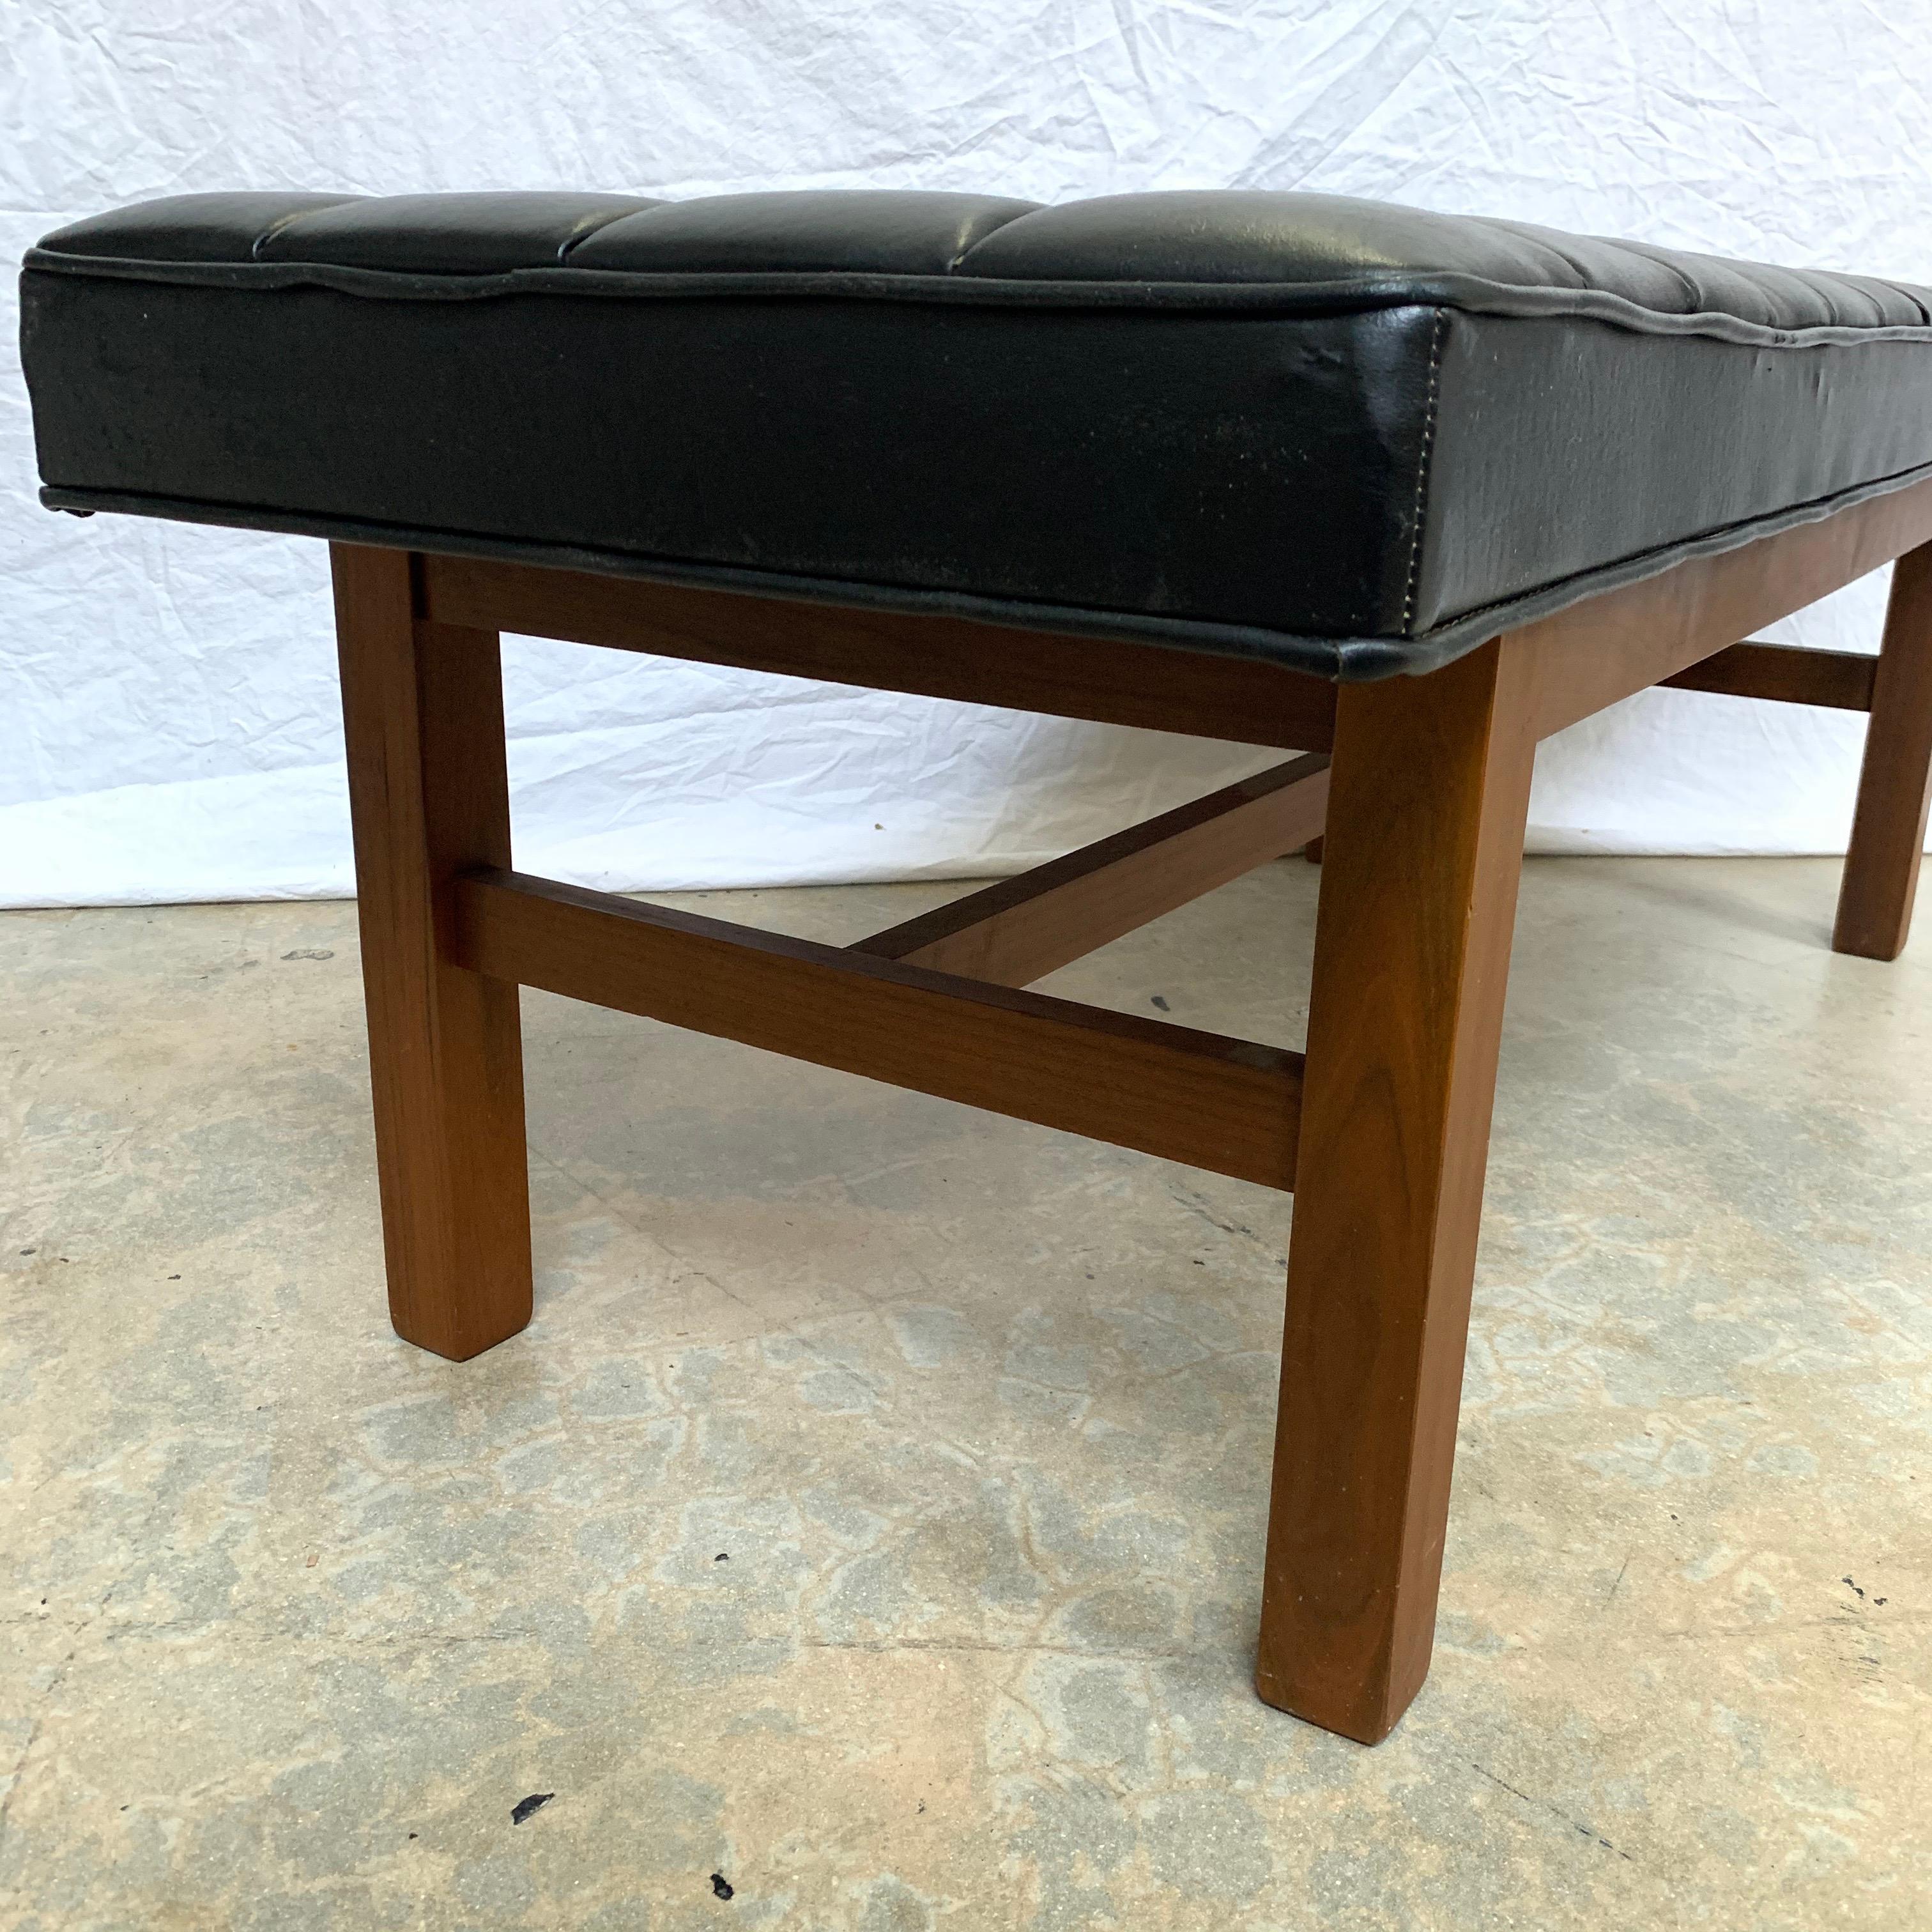 Upholstery Harvey Probber Black Vinyl Biscuit Tufted Walnut Bench or Ottoman, USA, 1960s